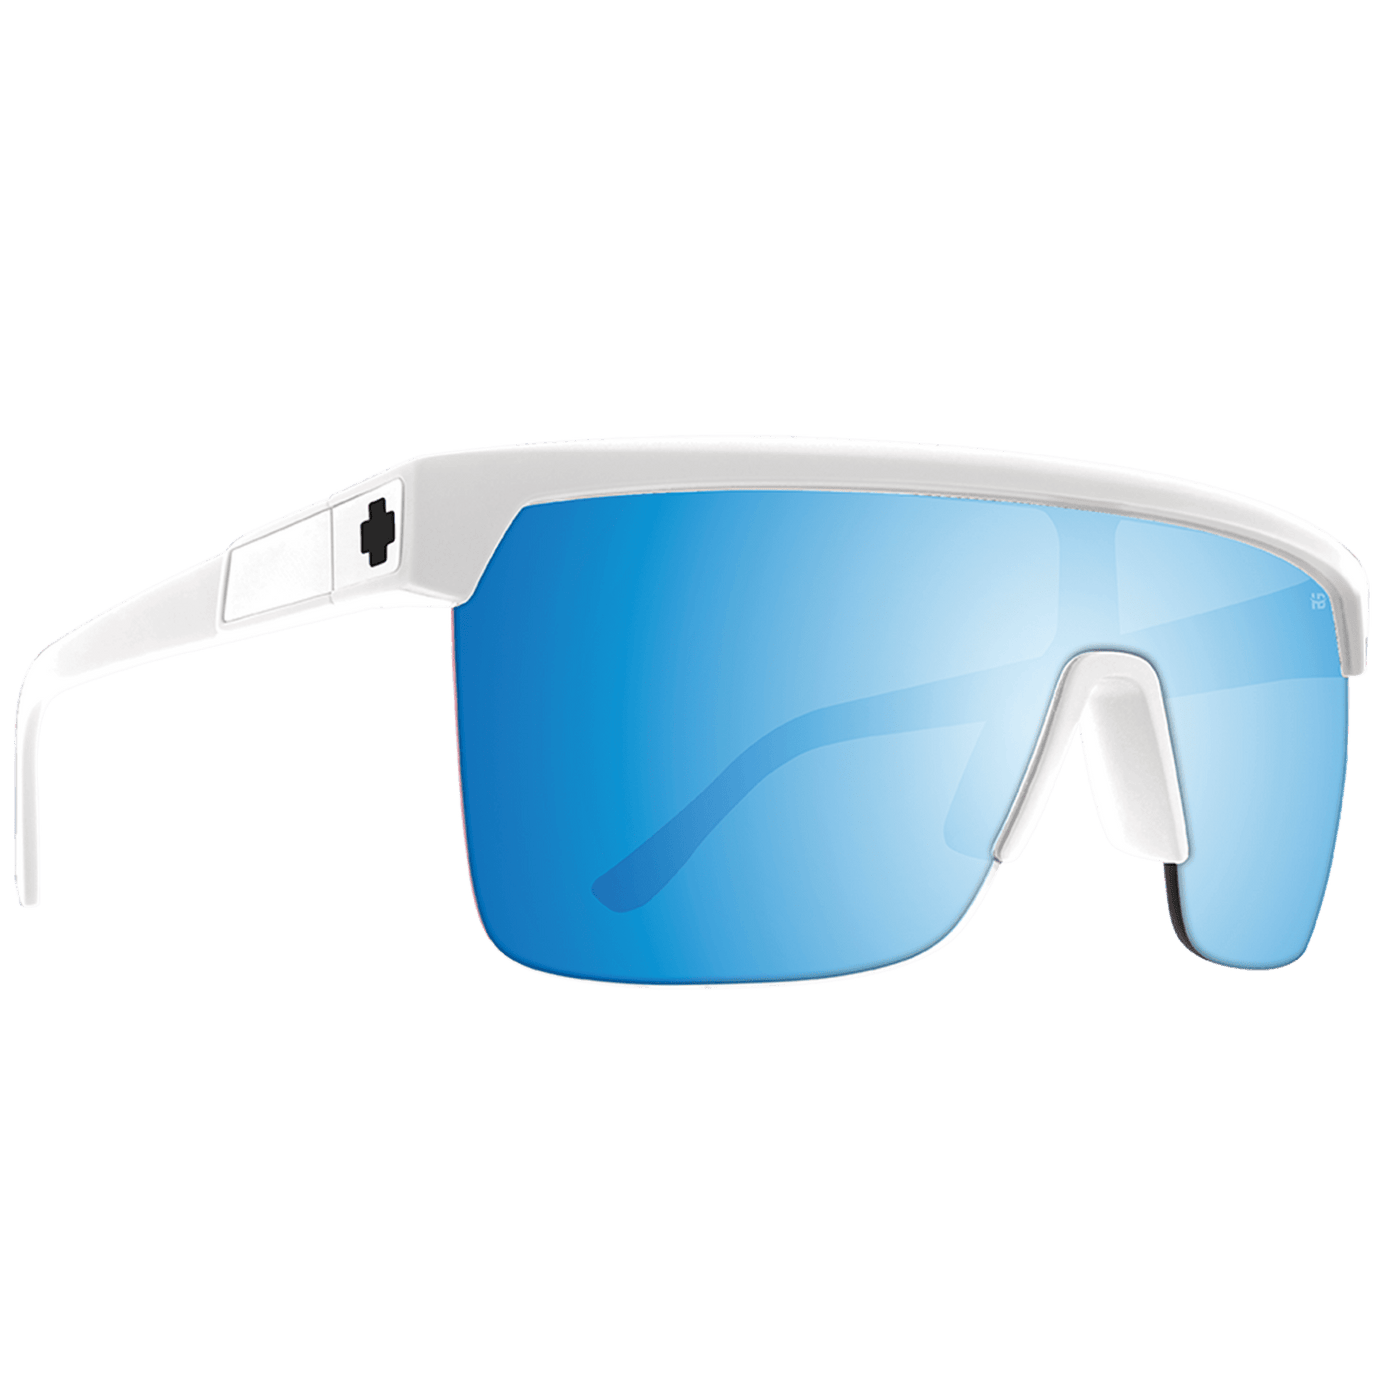 FLYNN 5050 Polarized Sunglasses, Happy BOOST - White 8Lines Shop - Fast Shipping